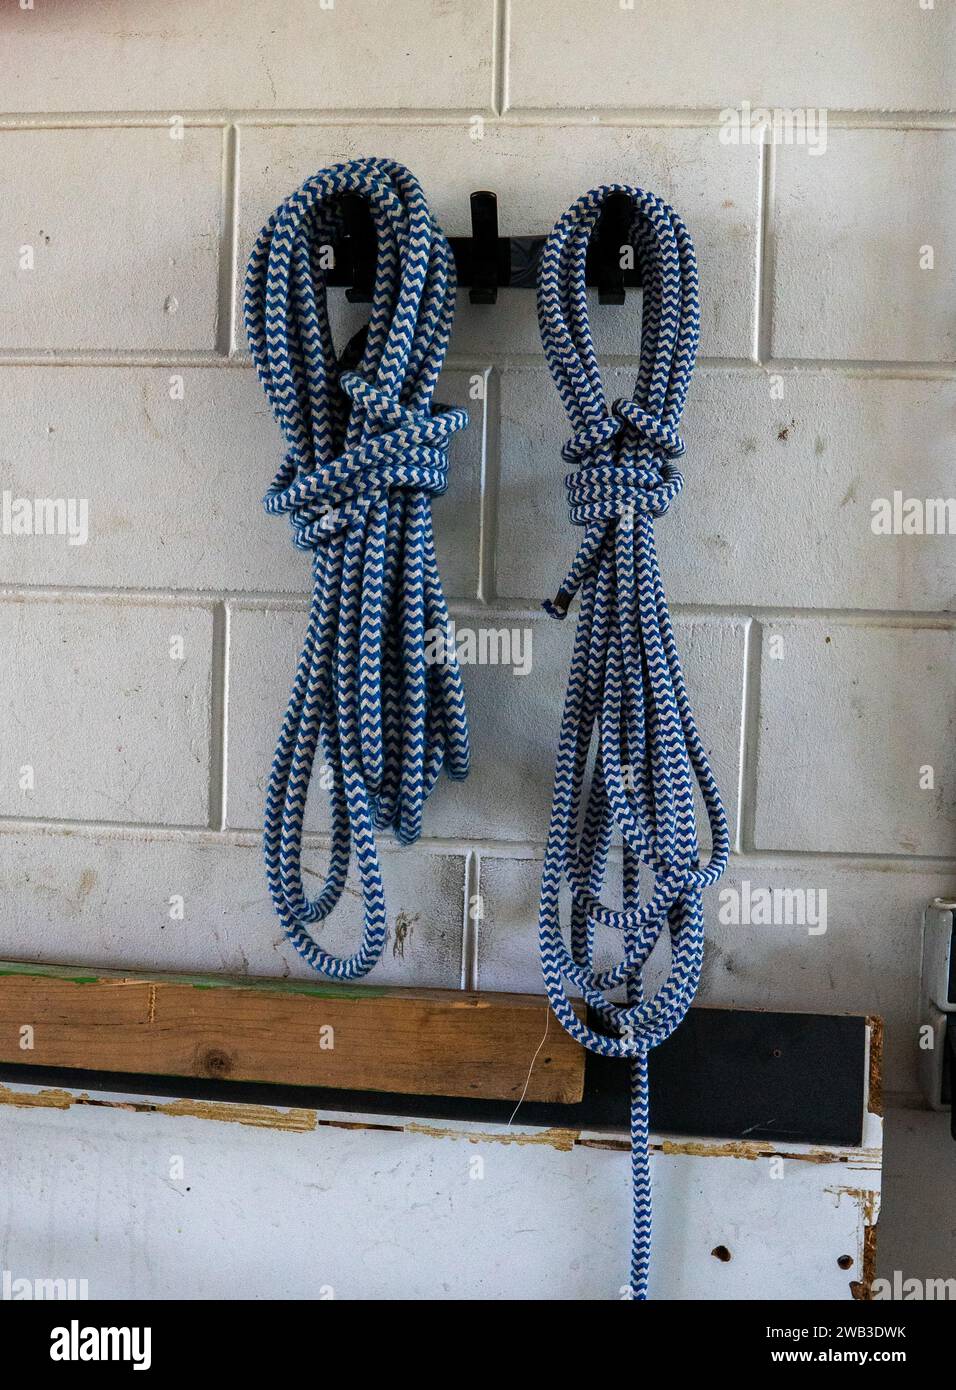 A closeup of ropes on hangers Stock Photo